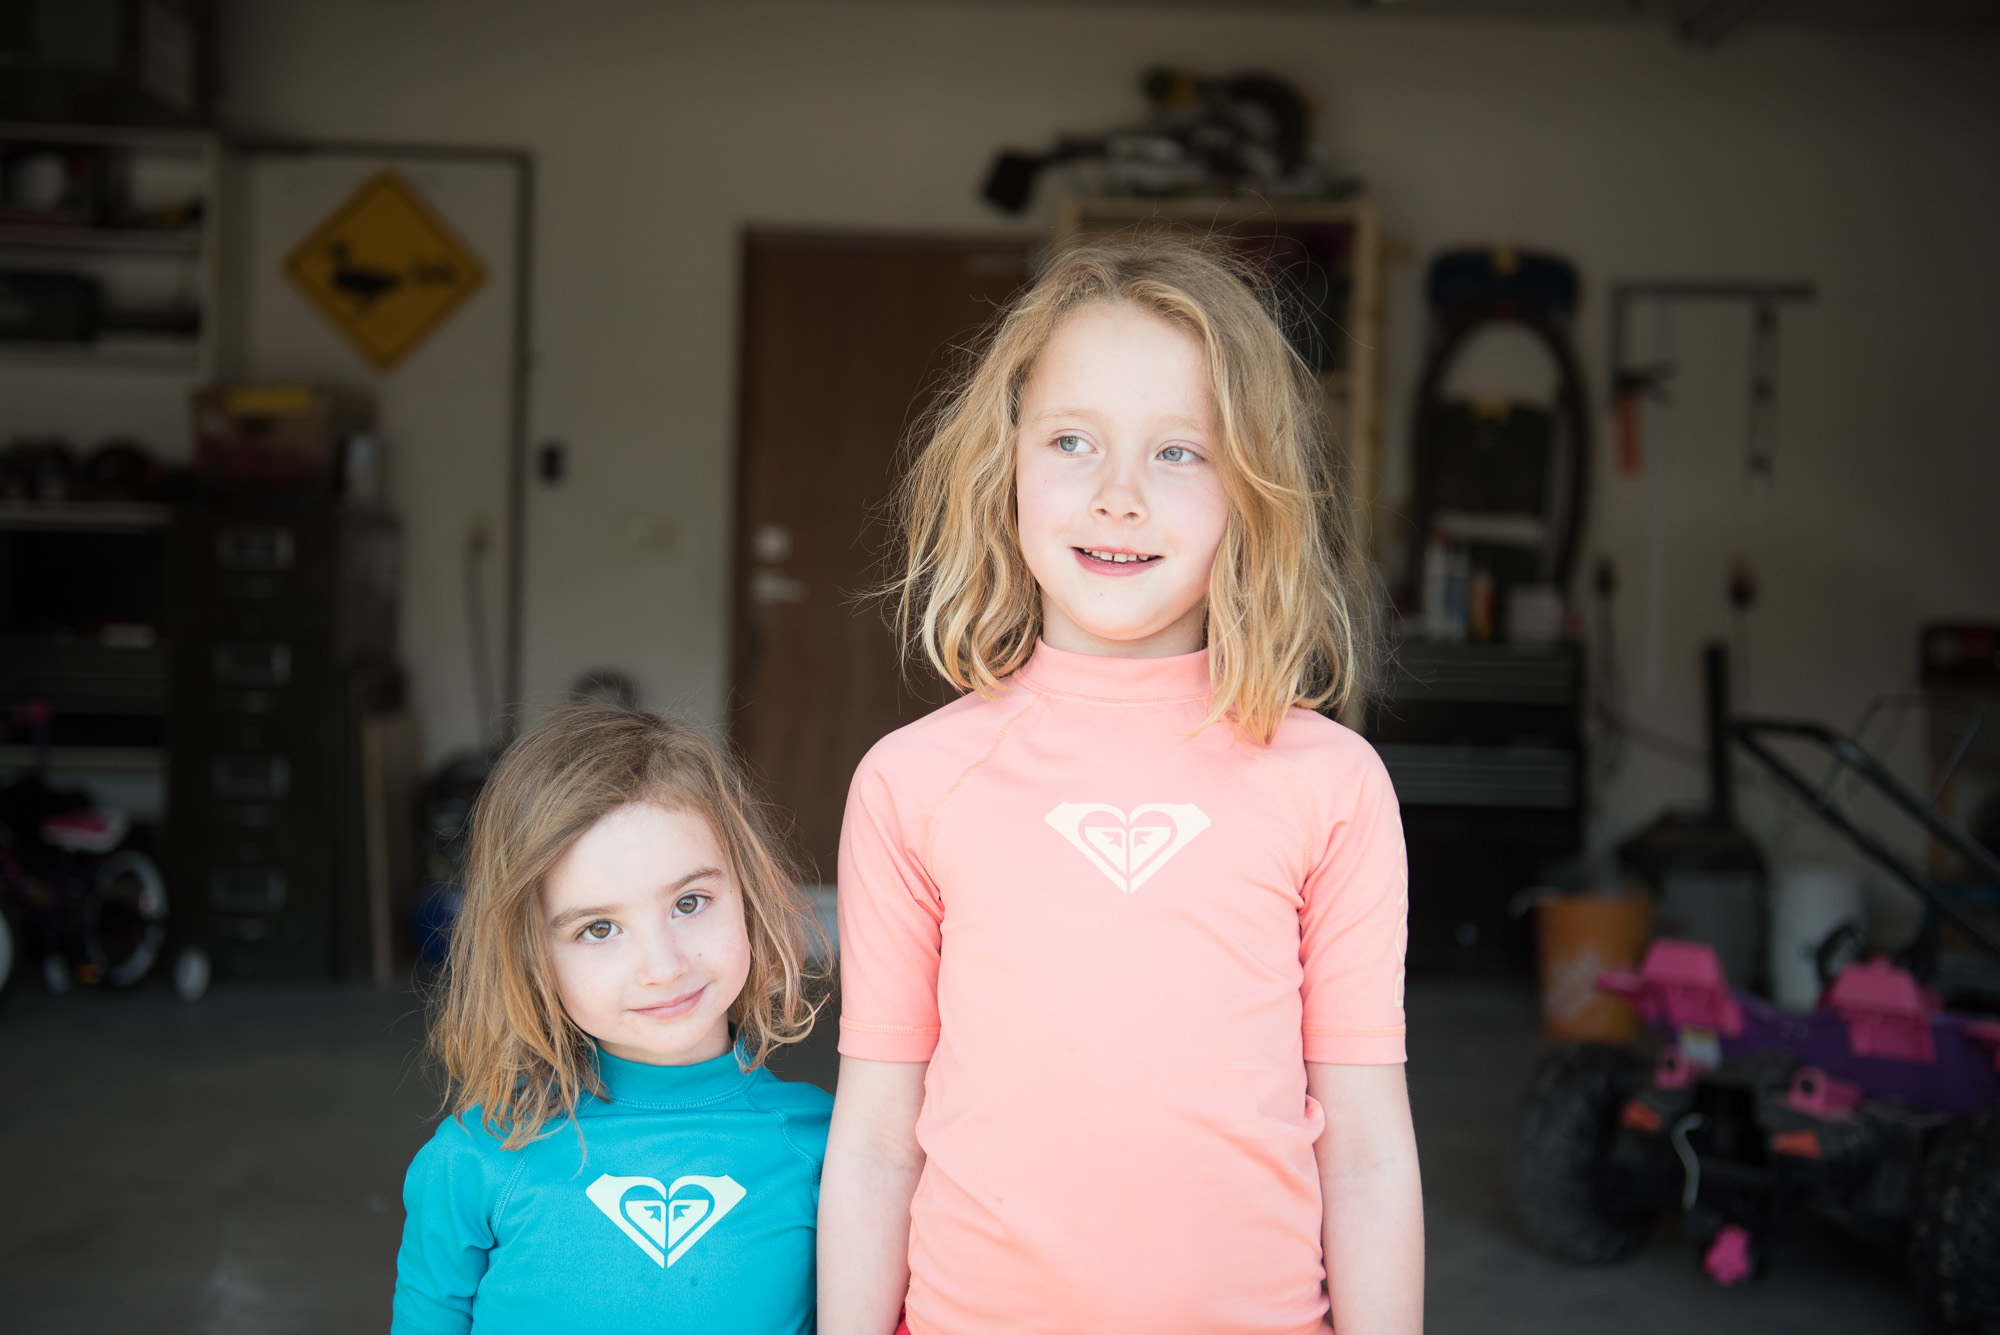 the straight out of camera, unedited, image of 2 sisters in garage light. 